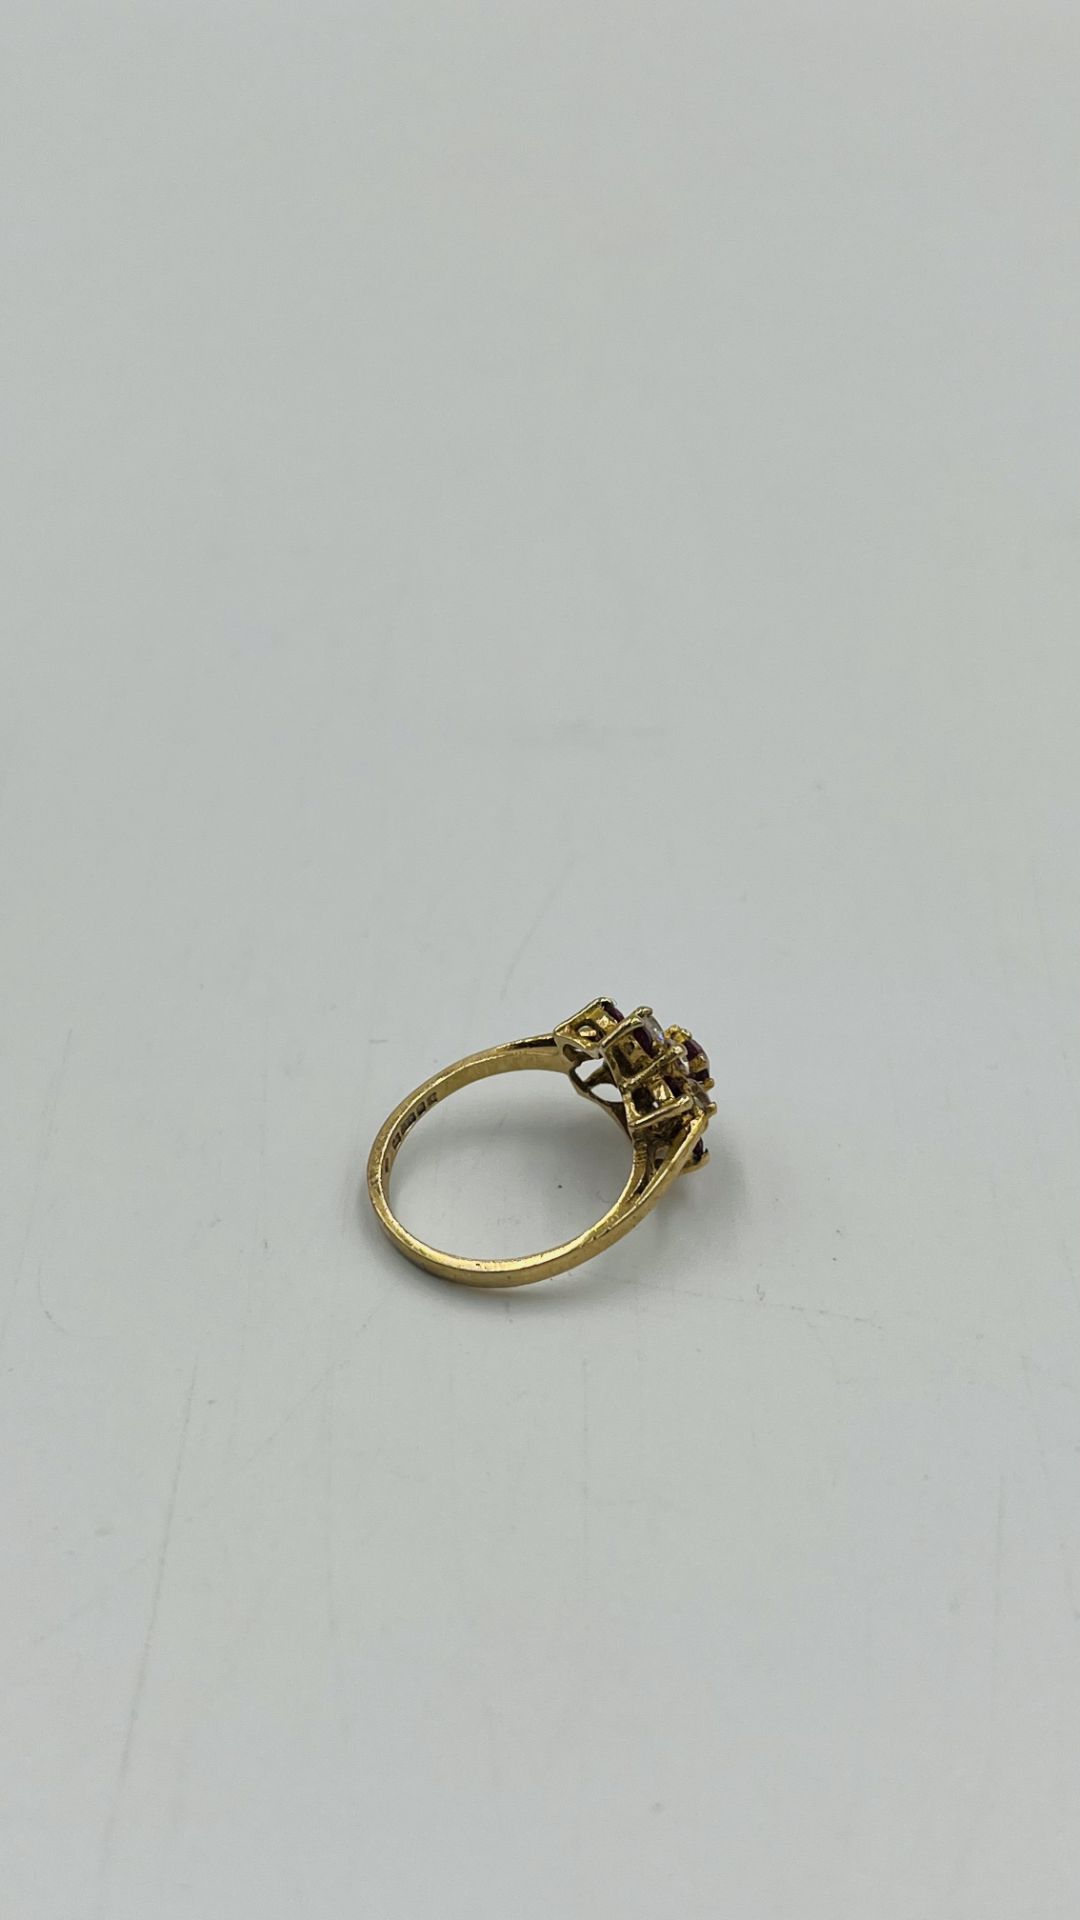 9ct gold daisy ring - Image 5 of 7